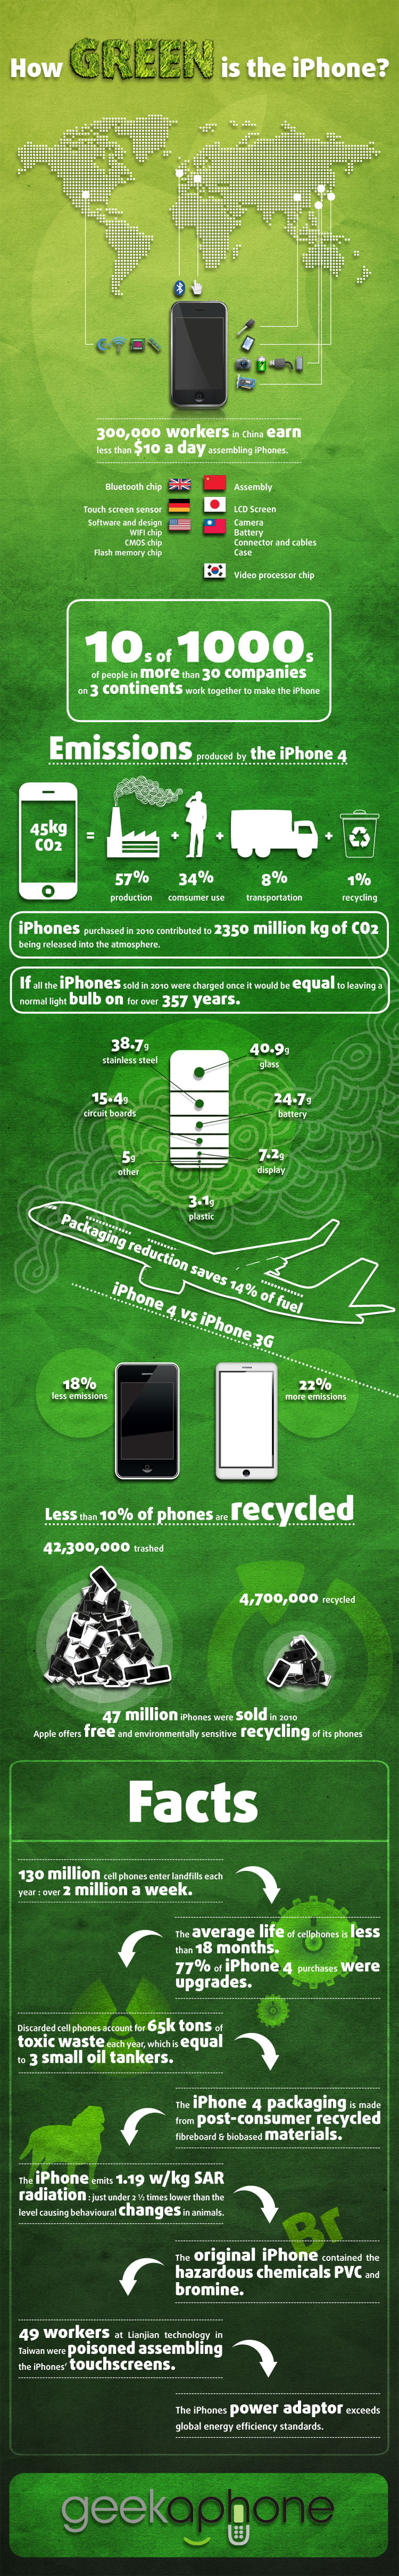 How Green is the iPhone 4